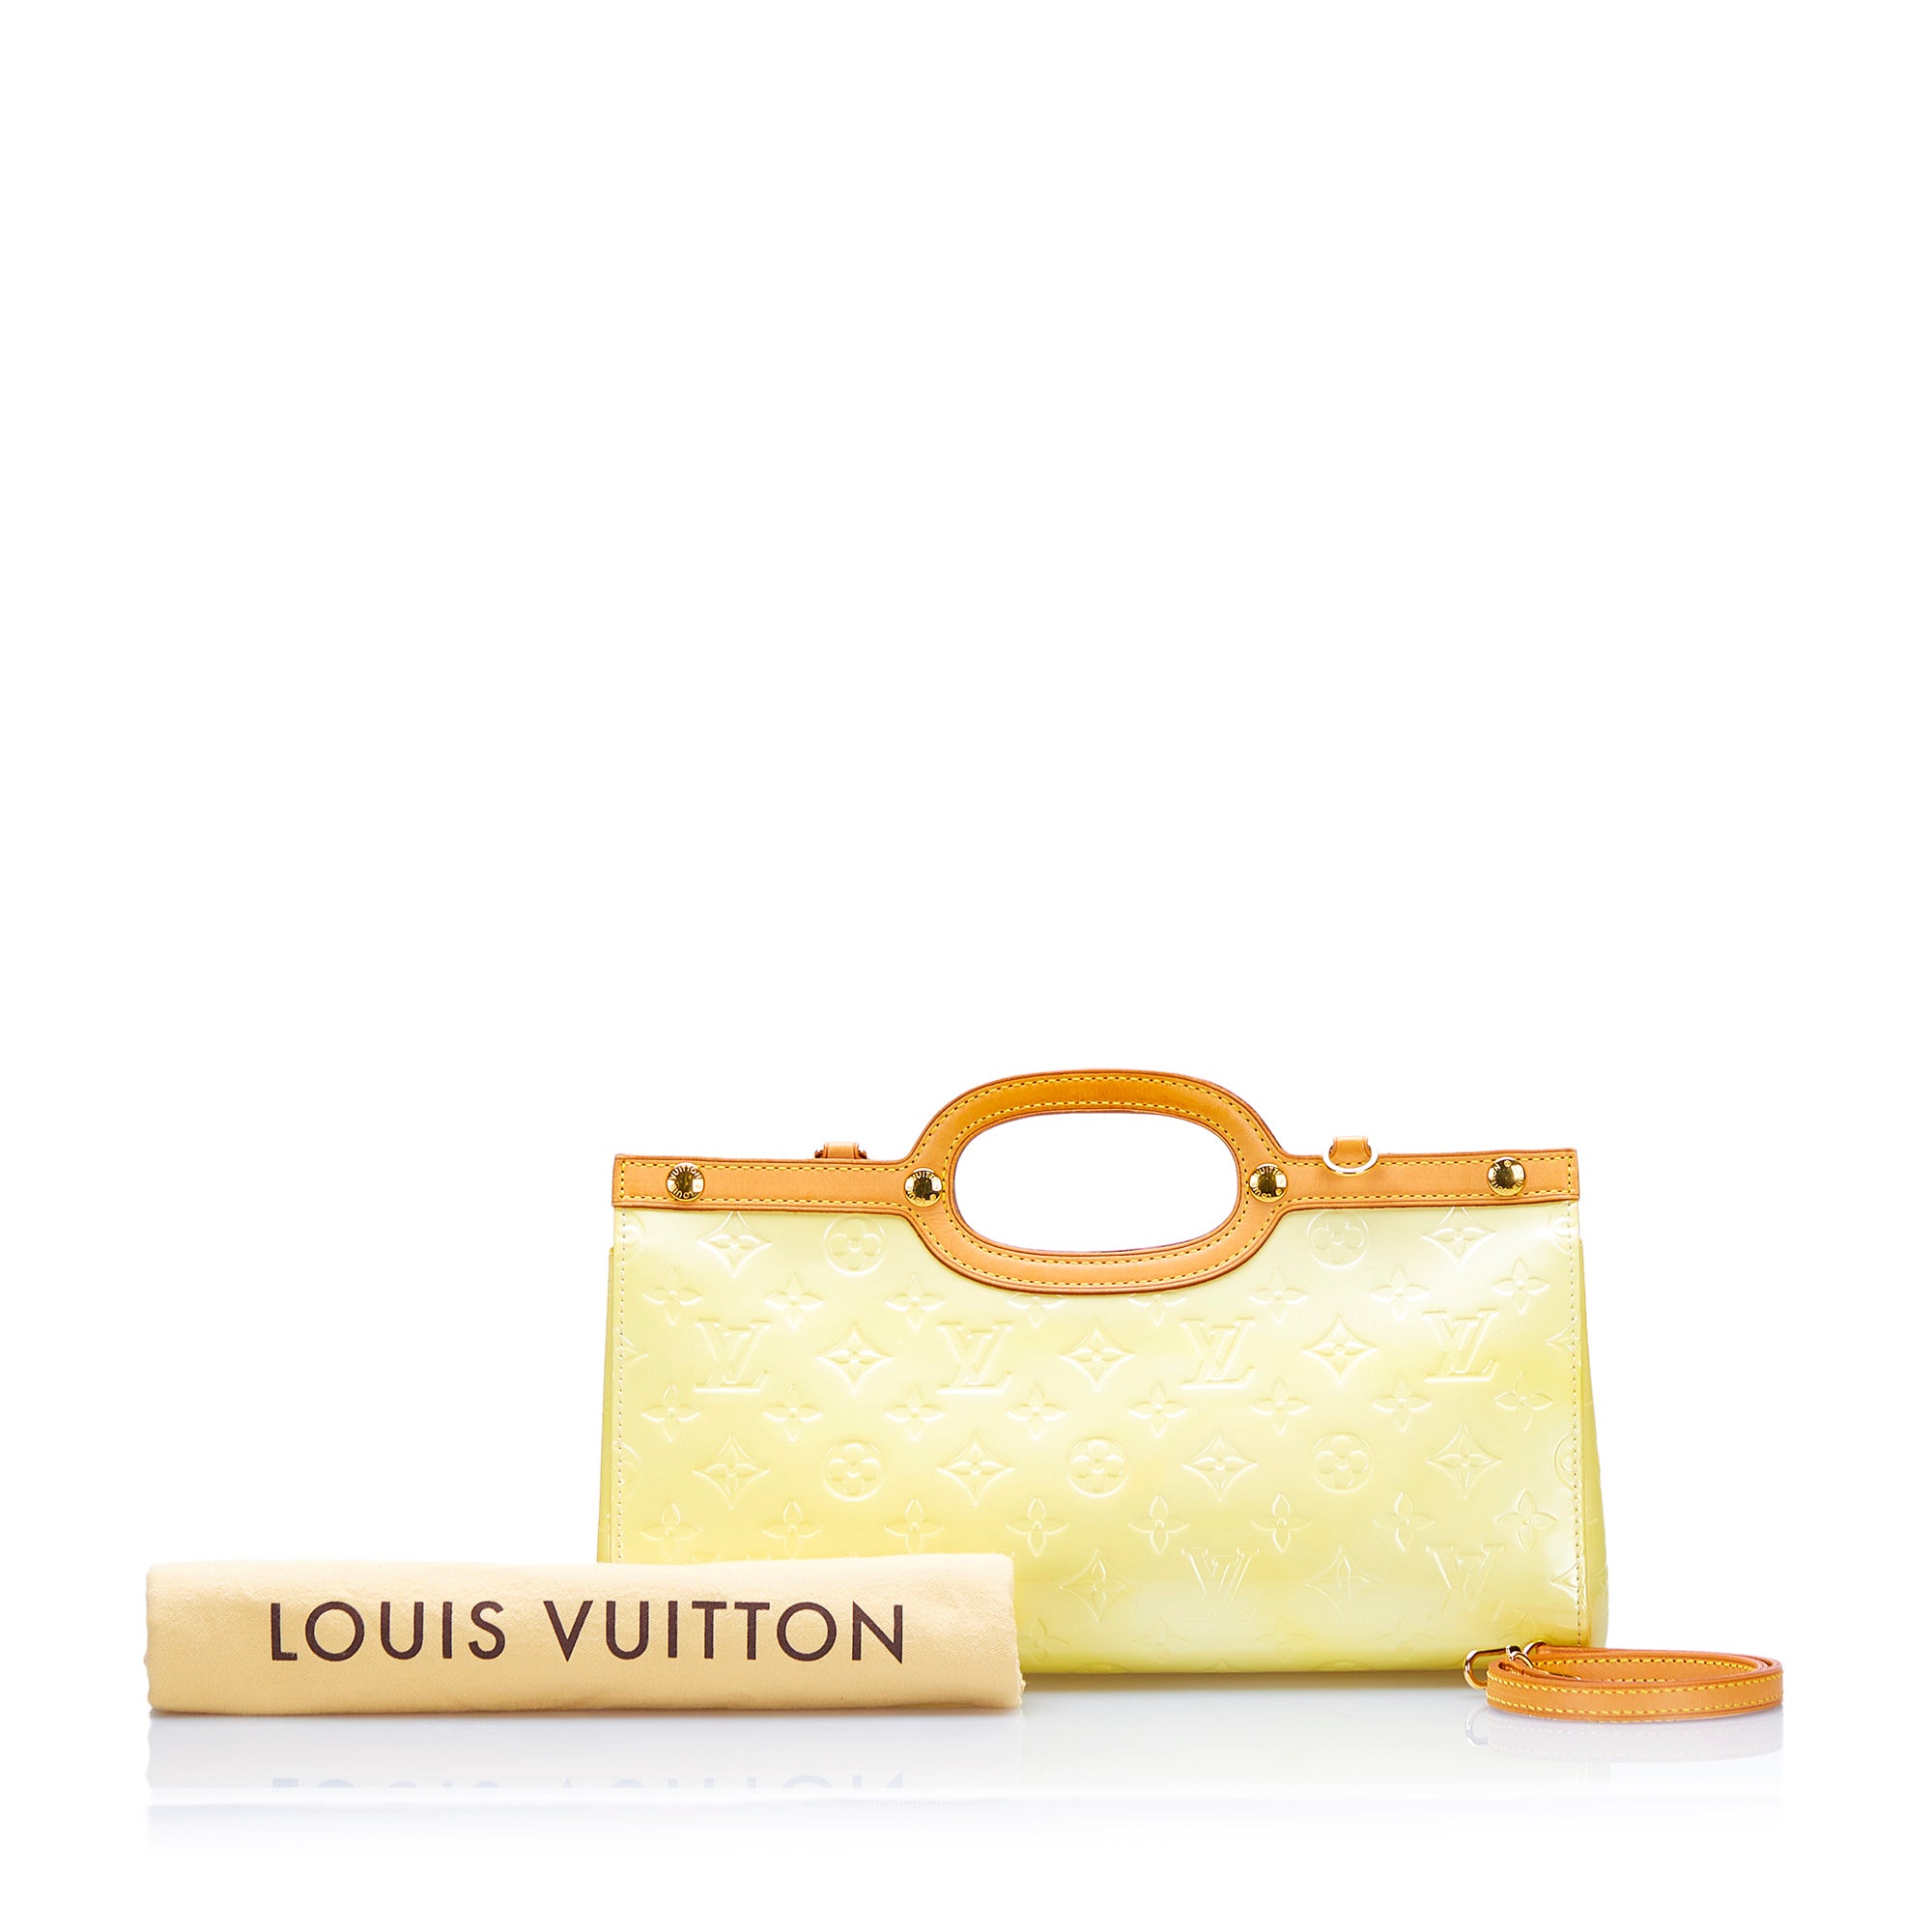 Quotations from second hand bags Louis Vuitton Speedy 35